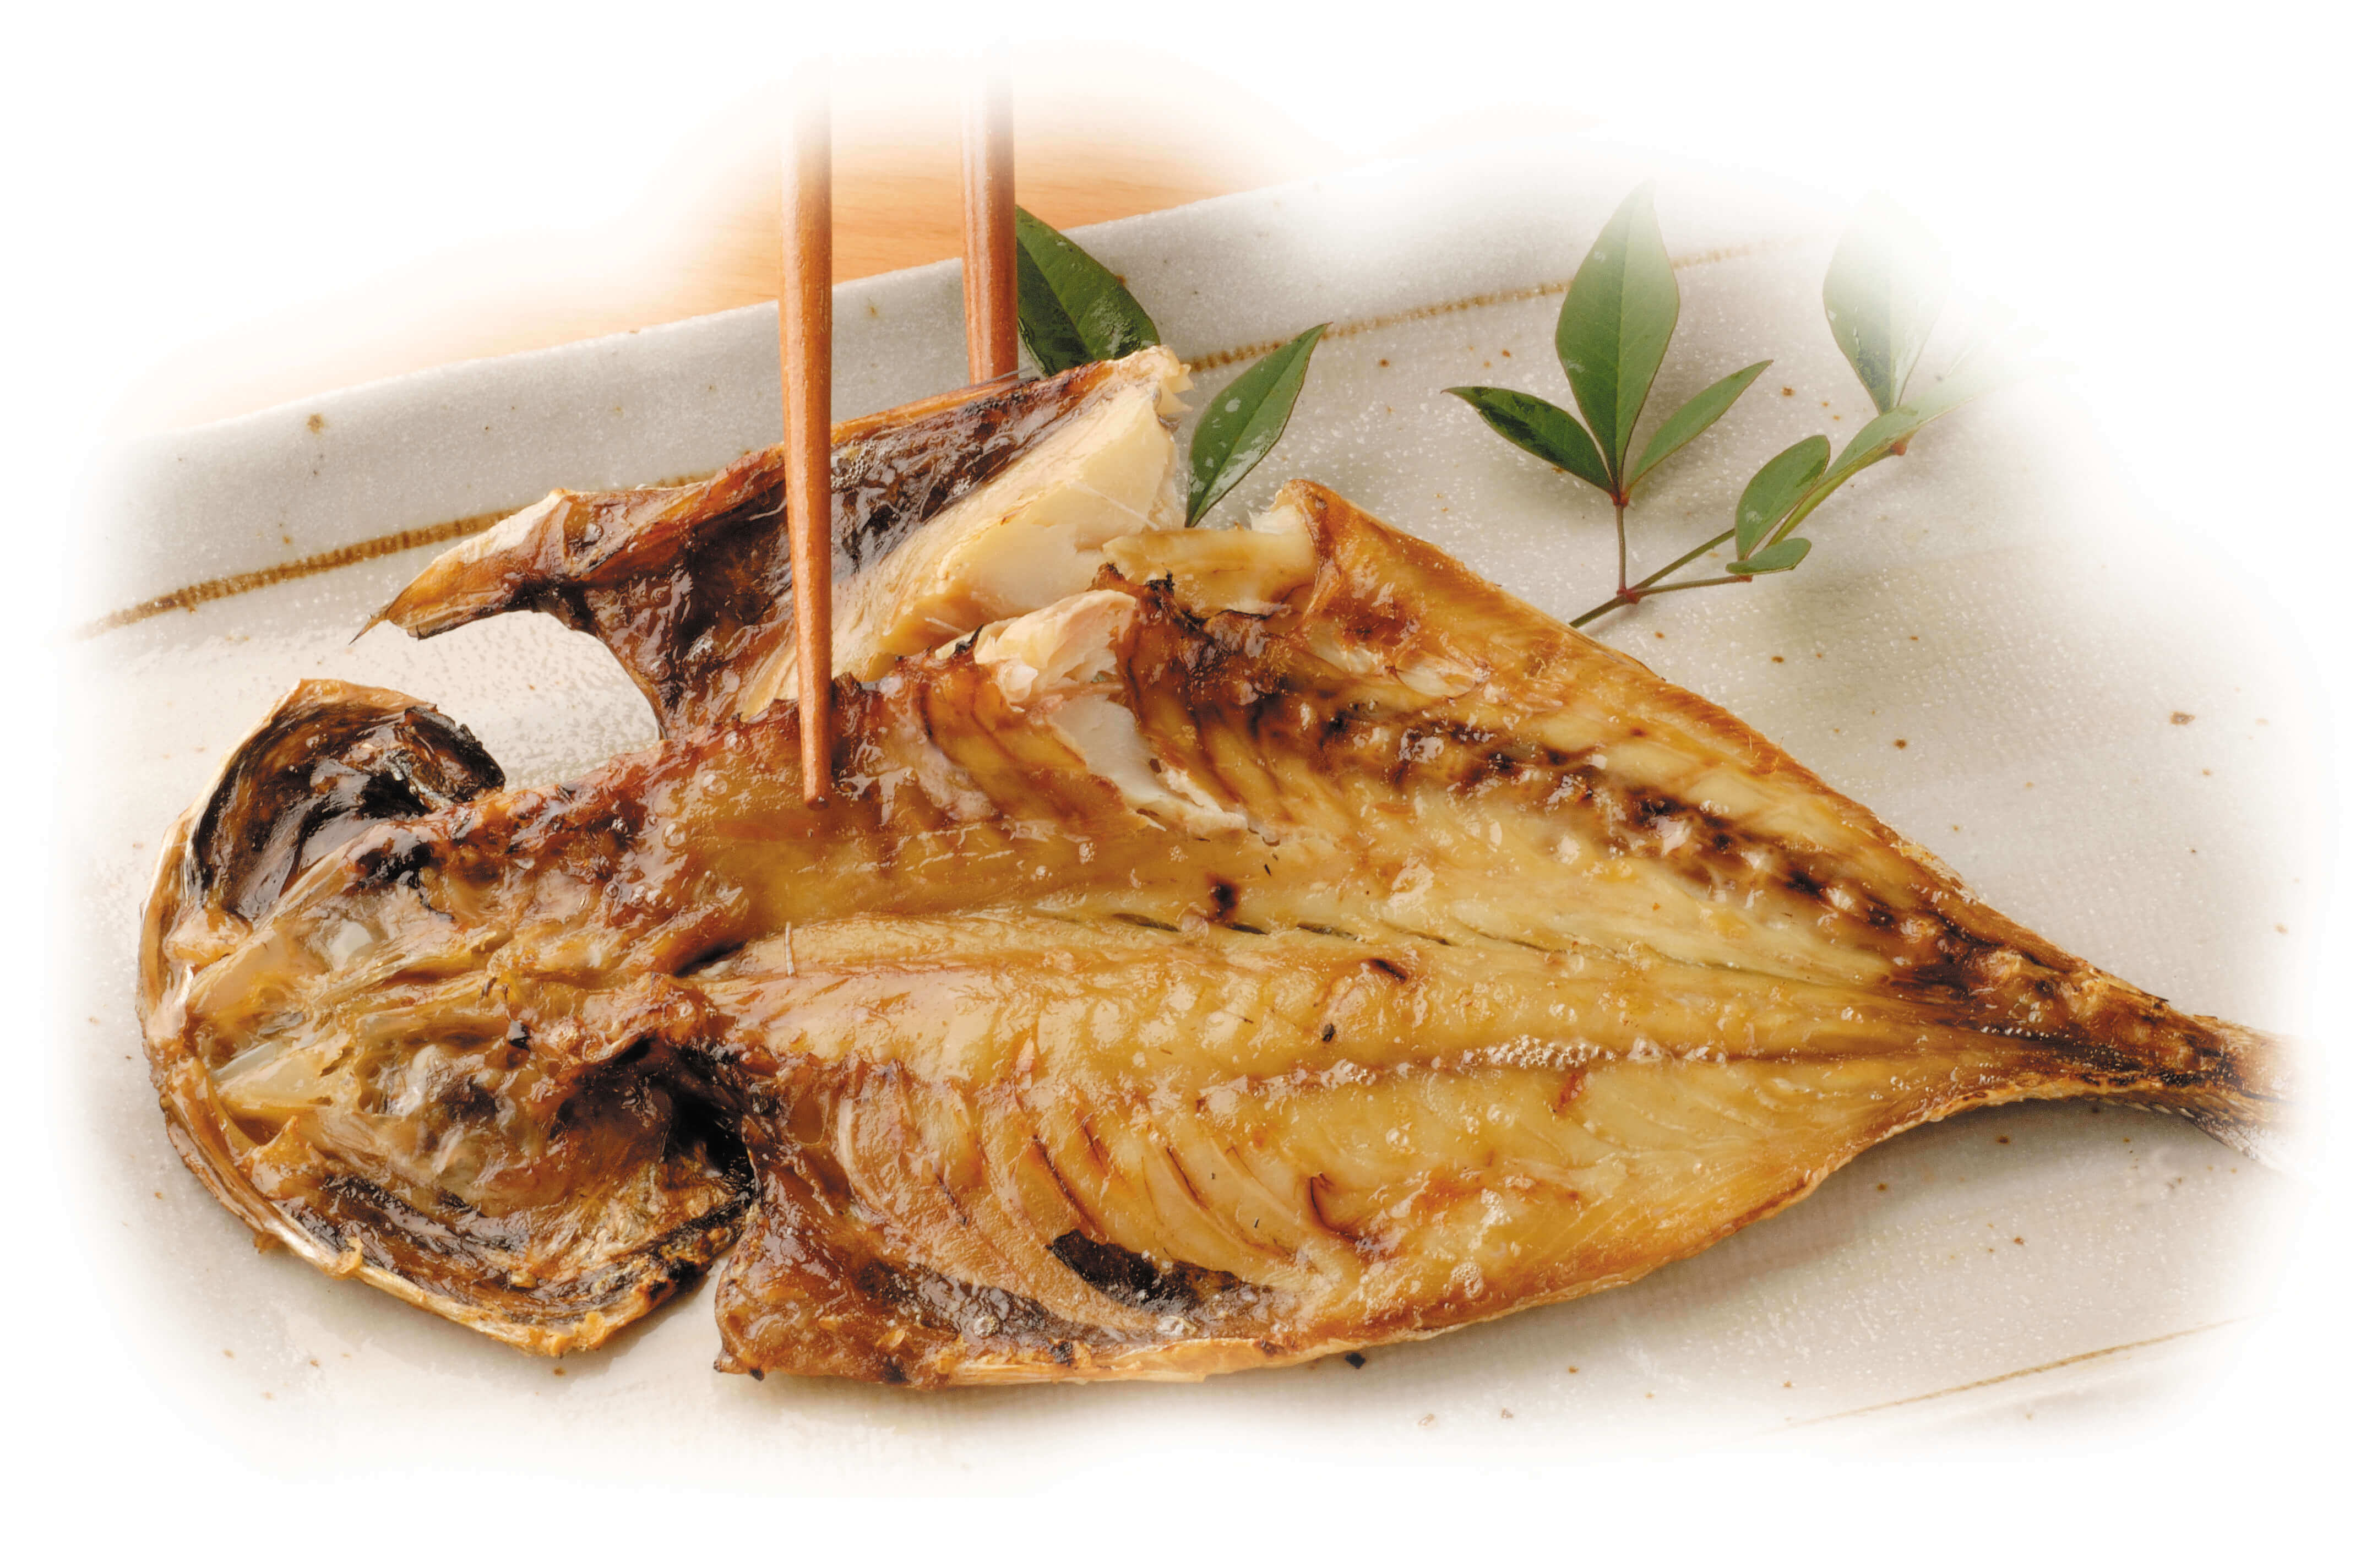 Grilled horse mackerel that you can eat even the bones